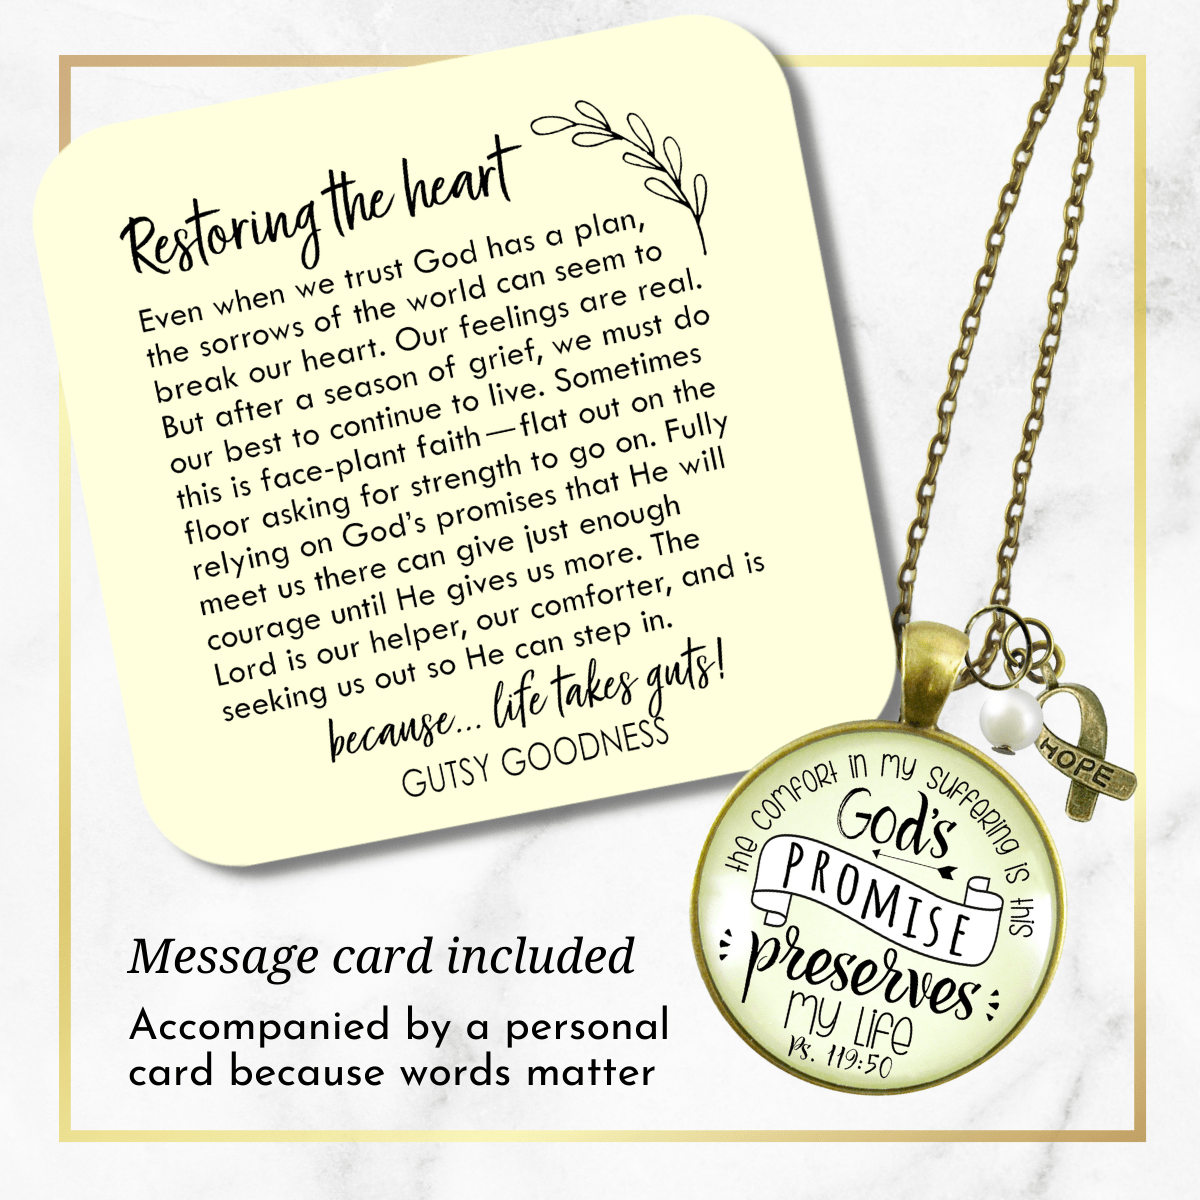 Gutsy Goodness Scripture Necklace Comfort in Suffering Gods Promise Psalm Jewelry - Gutsy Goodness;Scripture Necklace Comfort In Suffering Gods Promise Psalm Jewelry - Gutsy Goodness Handmade Jewelry Gifts